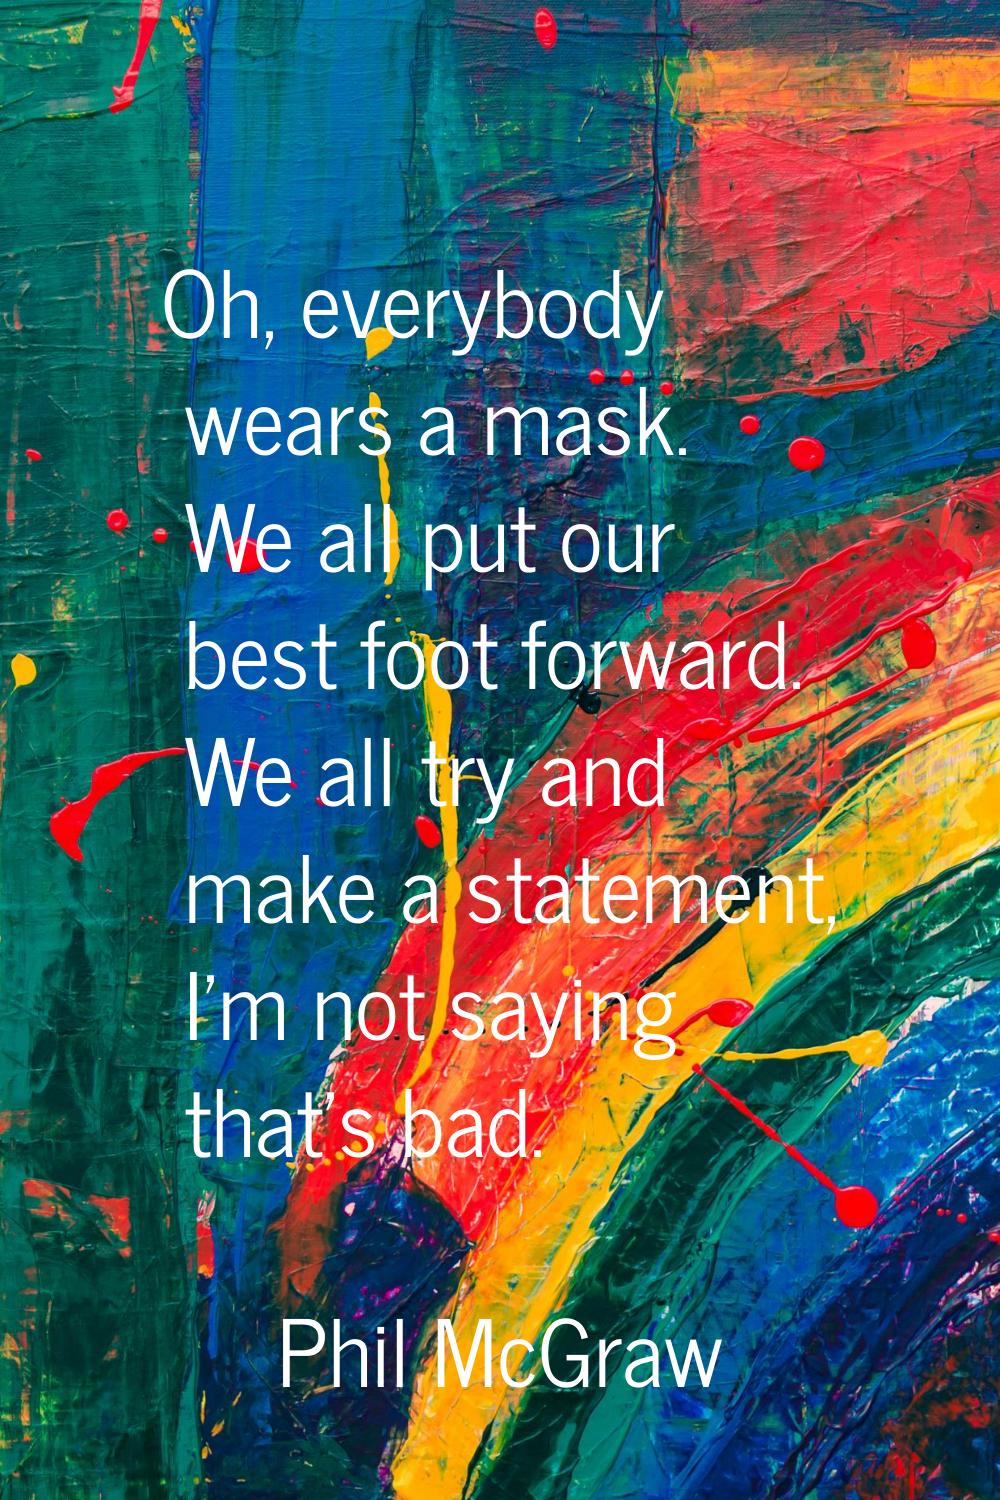 Oh, everybody wears a mask. We all put our best foot forward. We all try and make a statement, I'm 